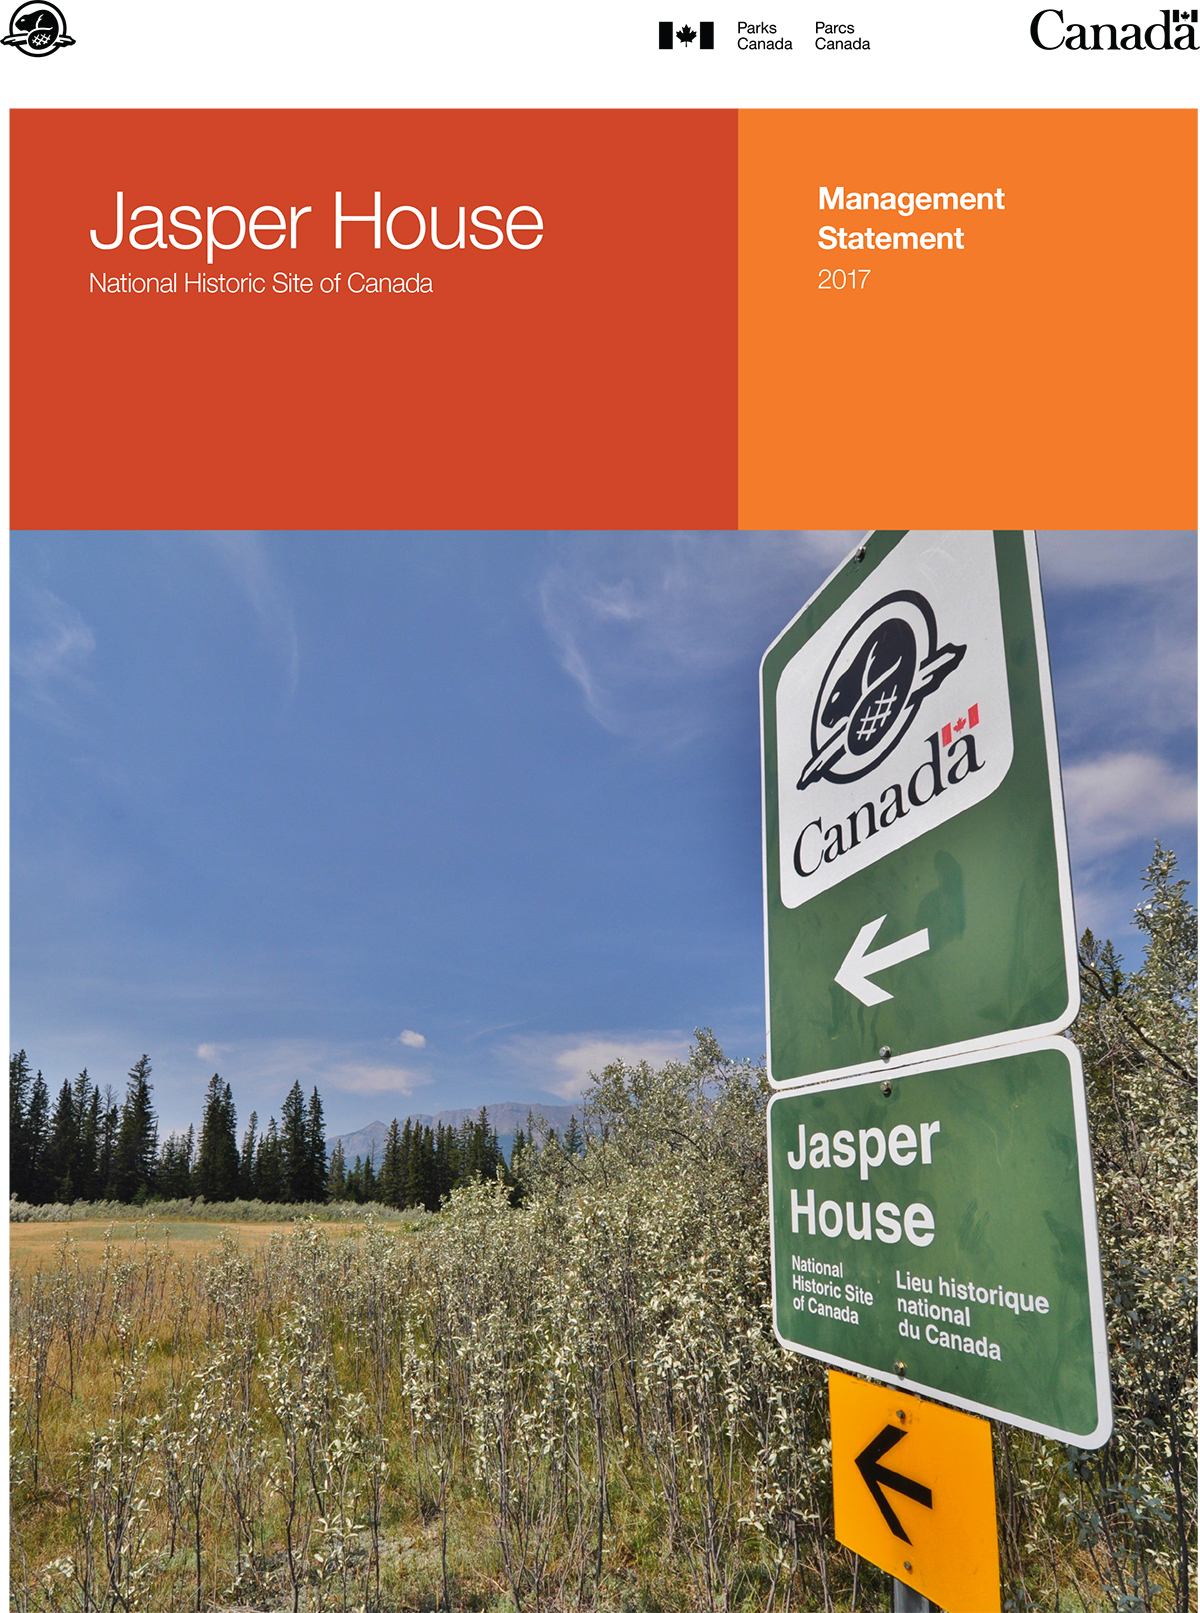 A sign that says Jasper House. Two orange rectangles. Written in white text are the words Jasper House National Historic Site of Canada Management Statement 2017